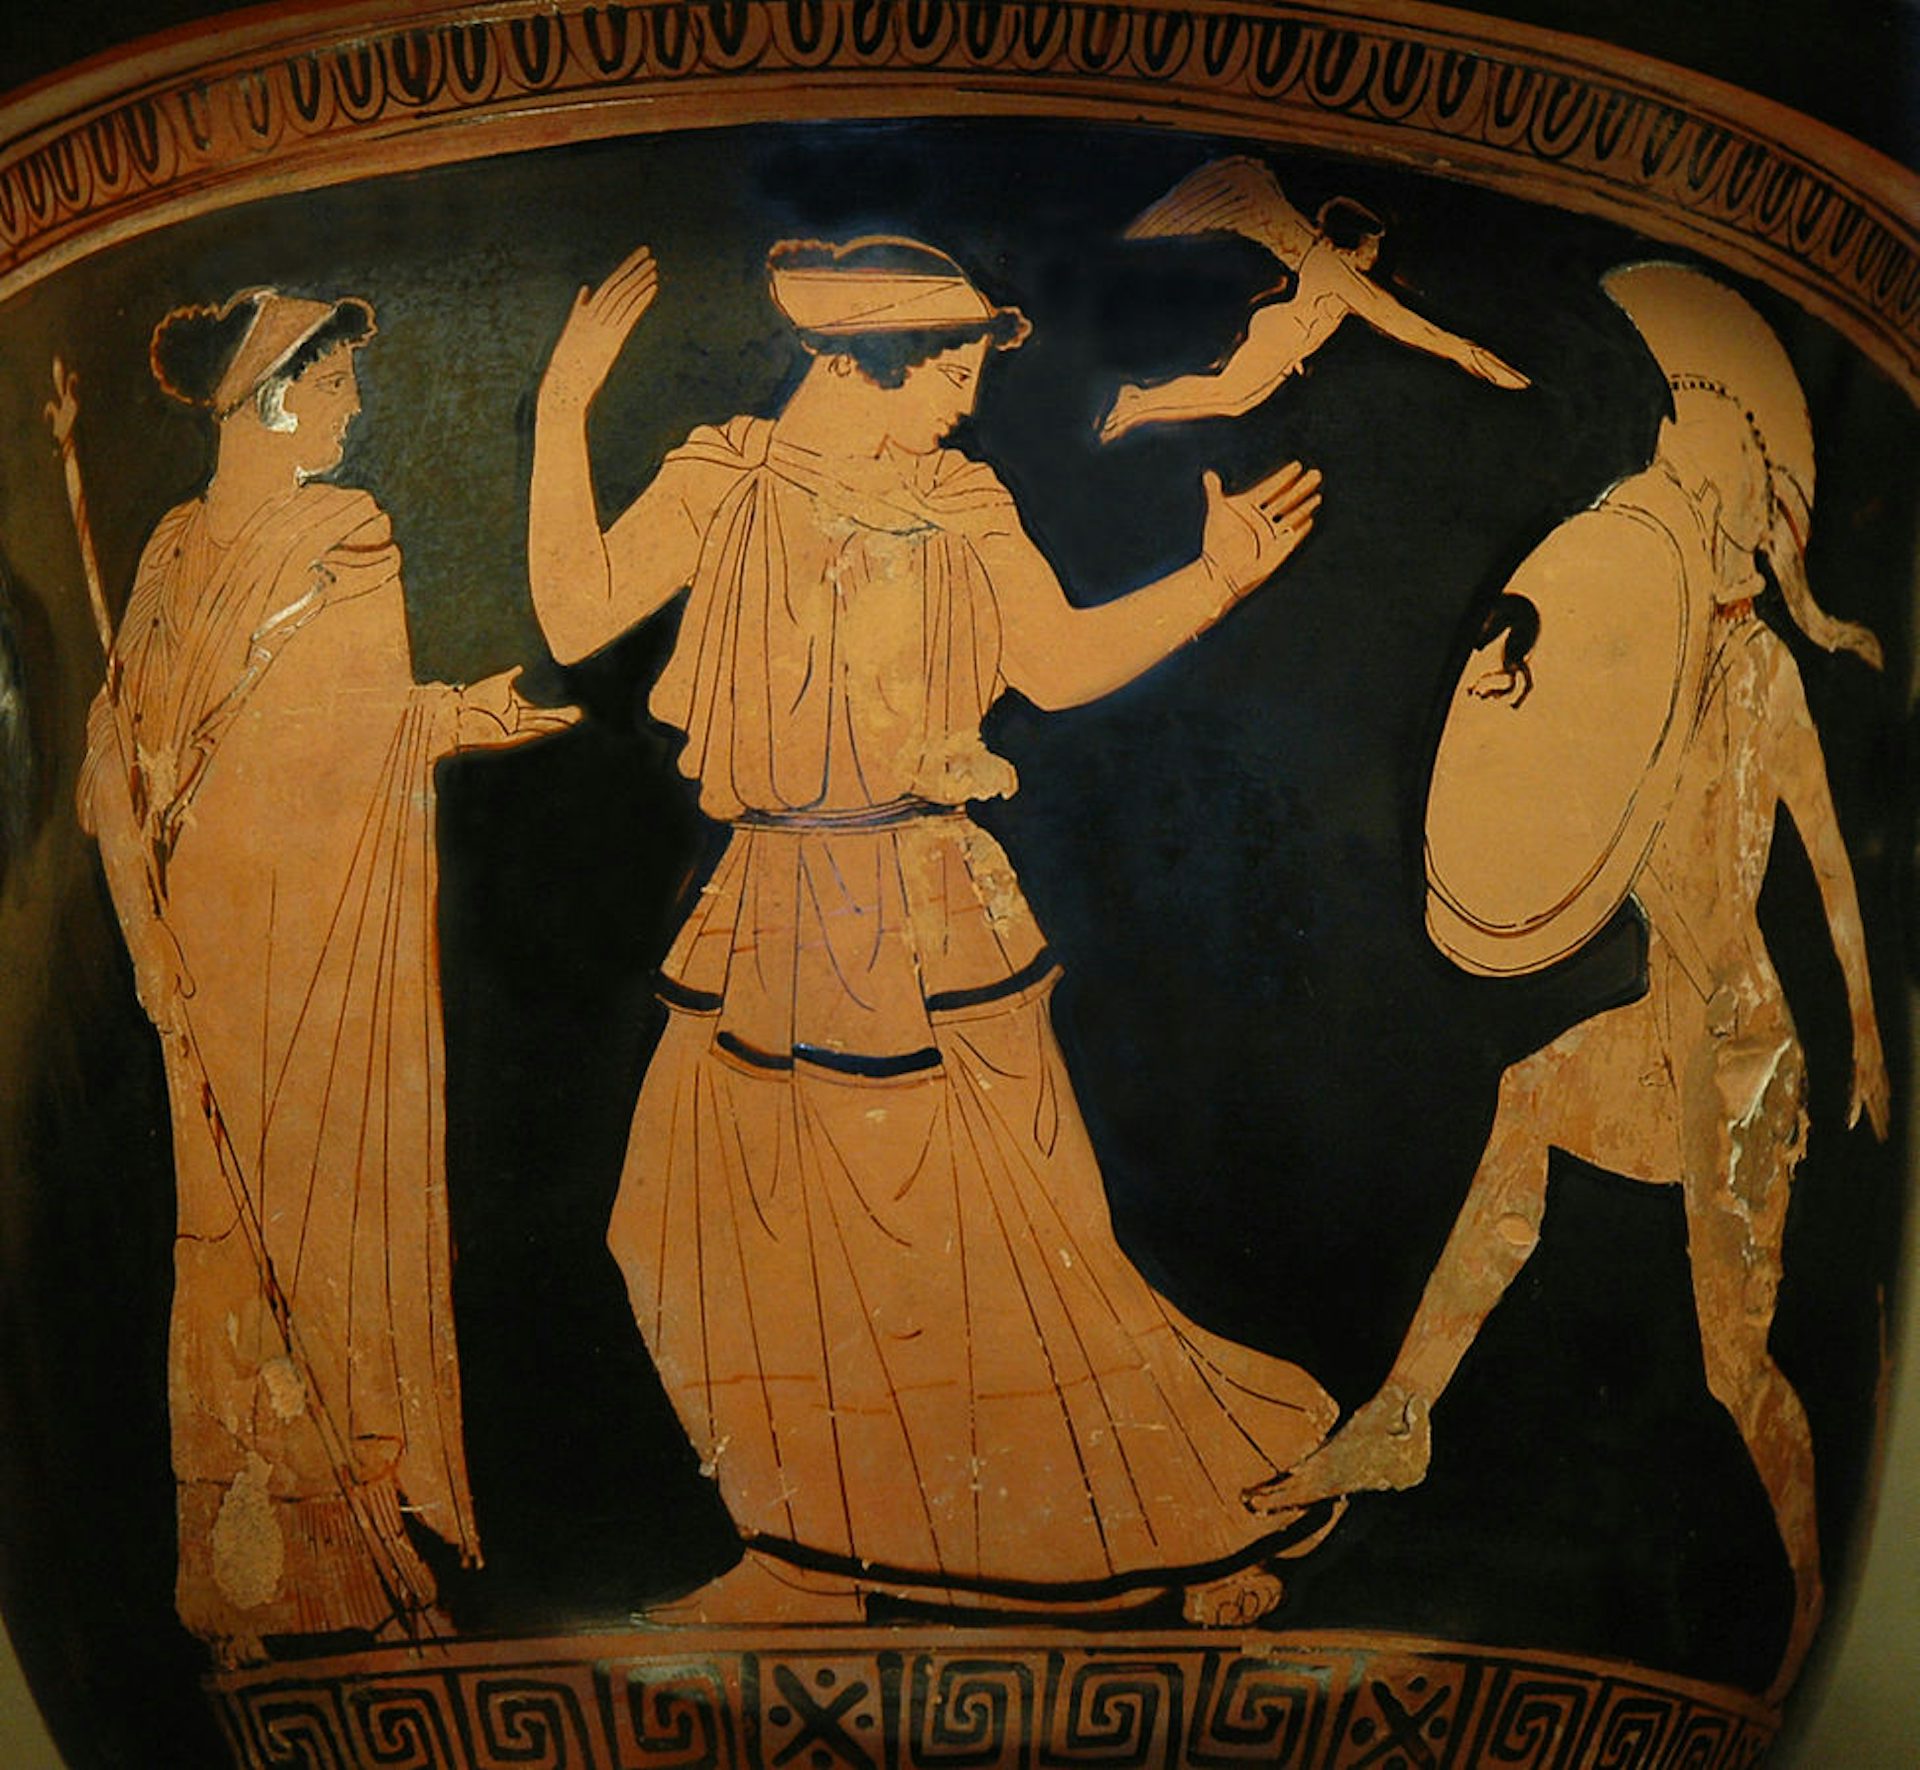 Attic red-figure krater of Helen and Menelaus, attributed to the Menelaus Painter, from 450–440 BCE